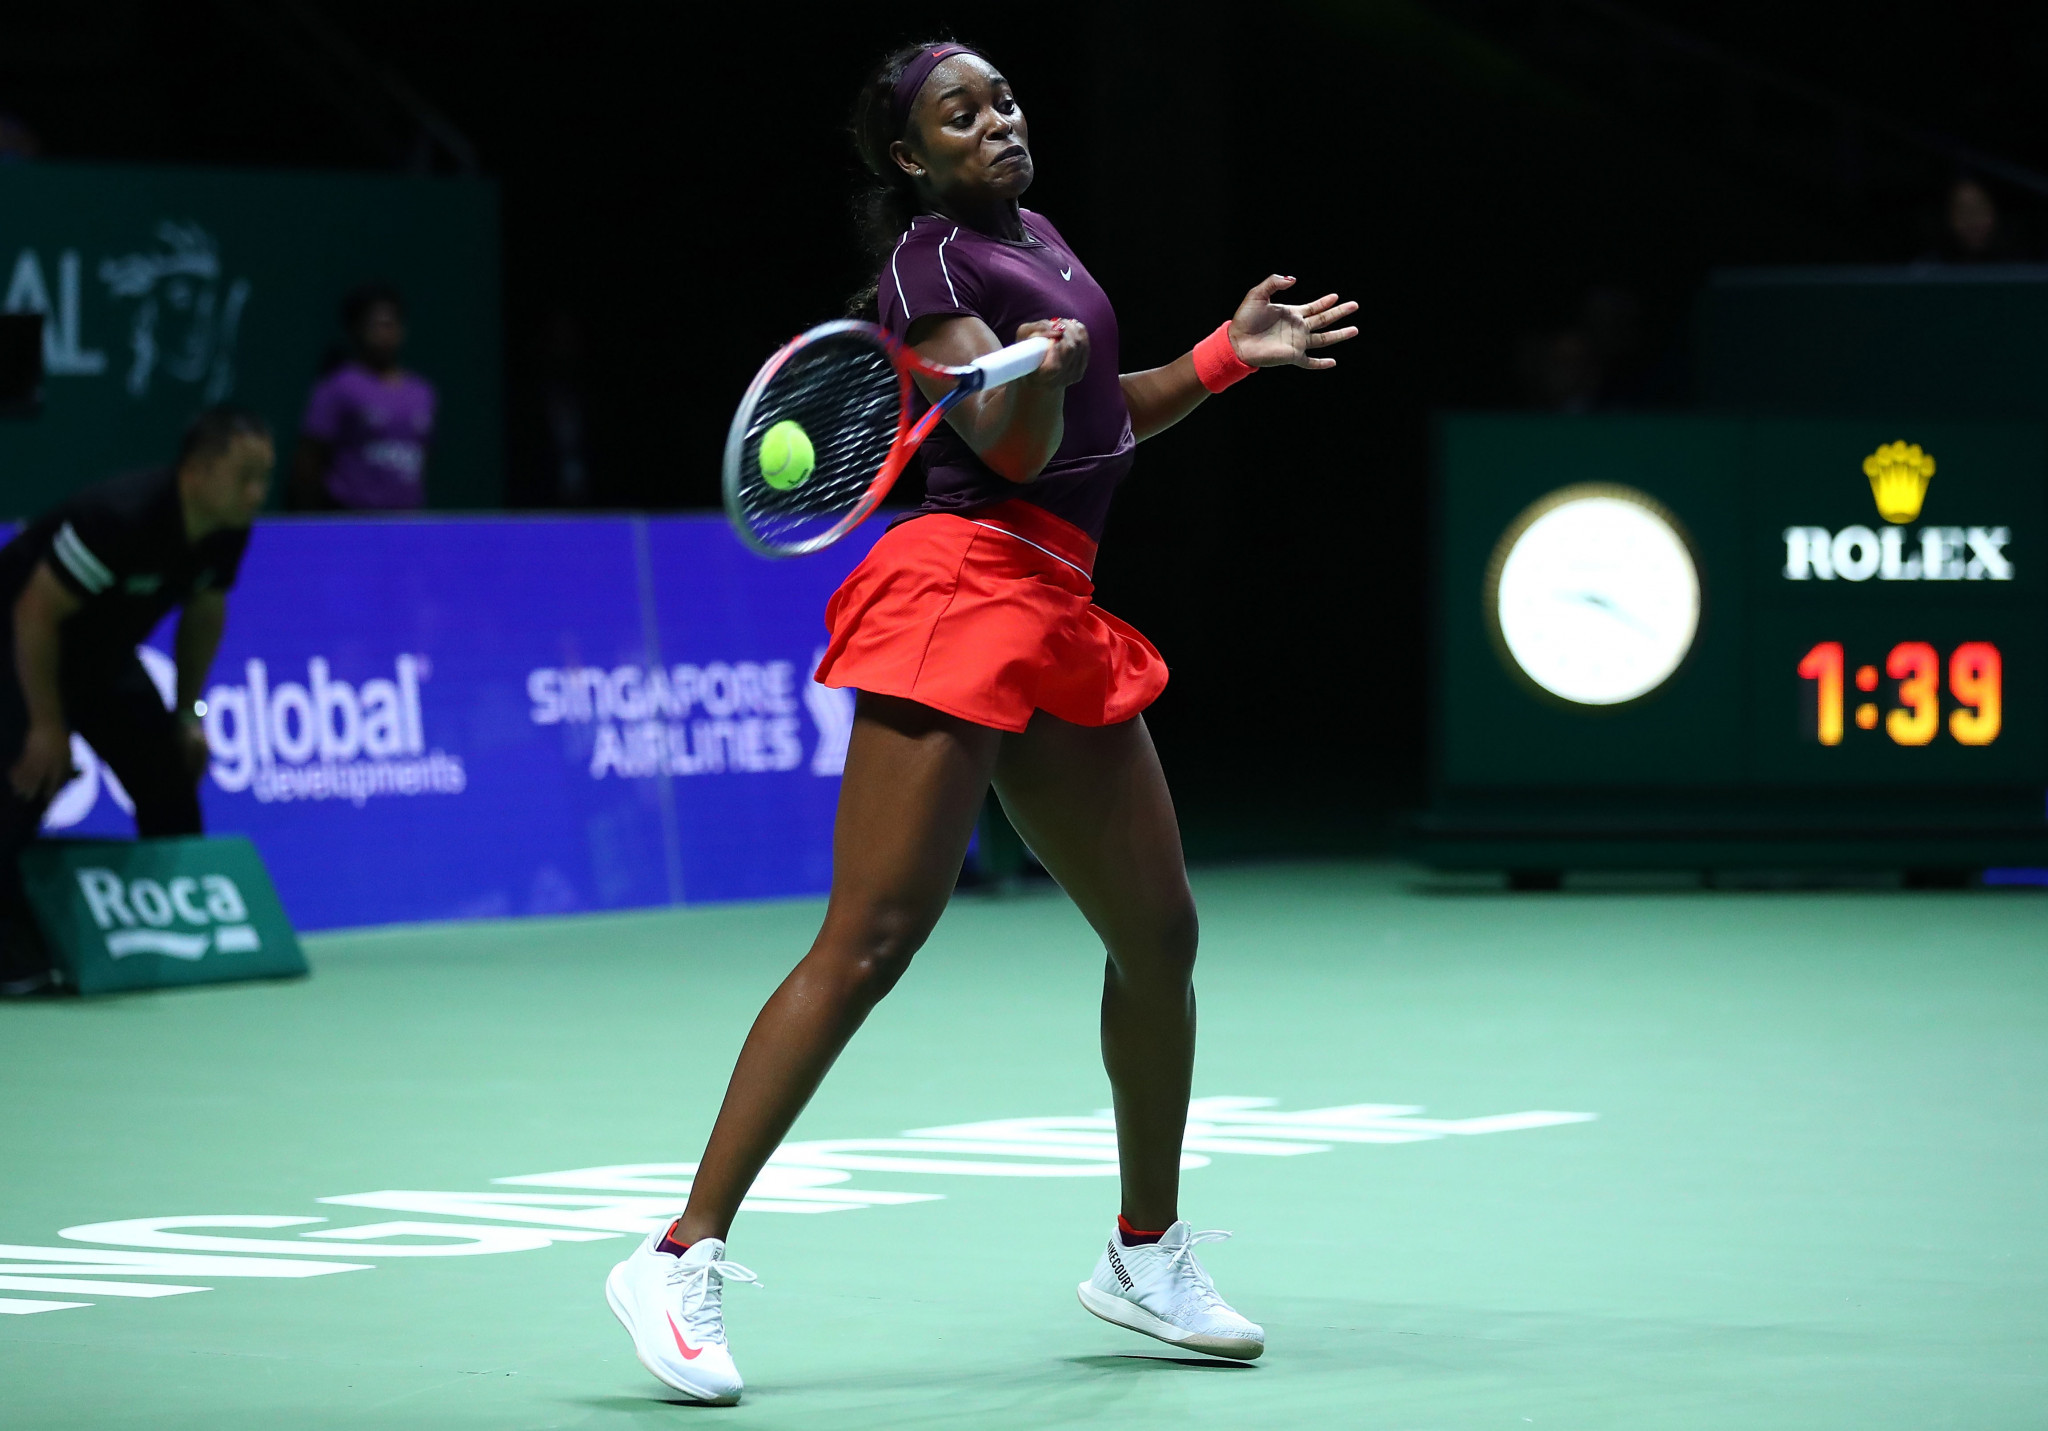 Sloane Stephens fought back to reach her first final at the tournament ©Getty Images